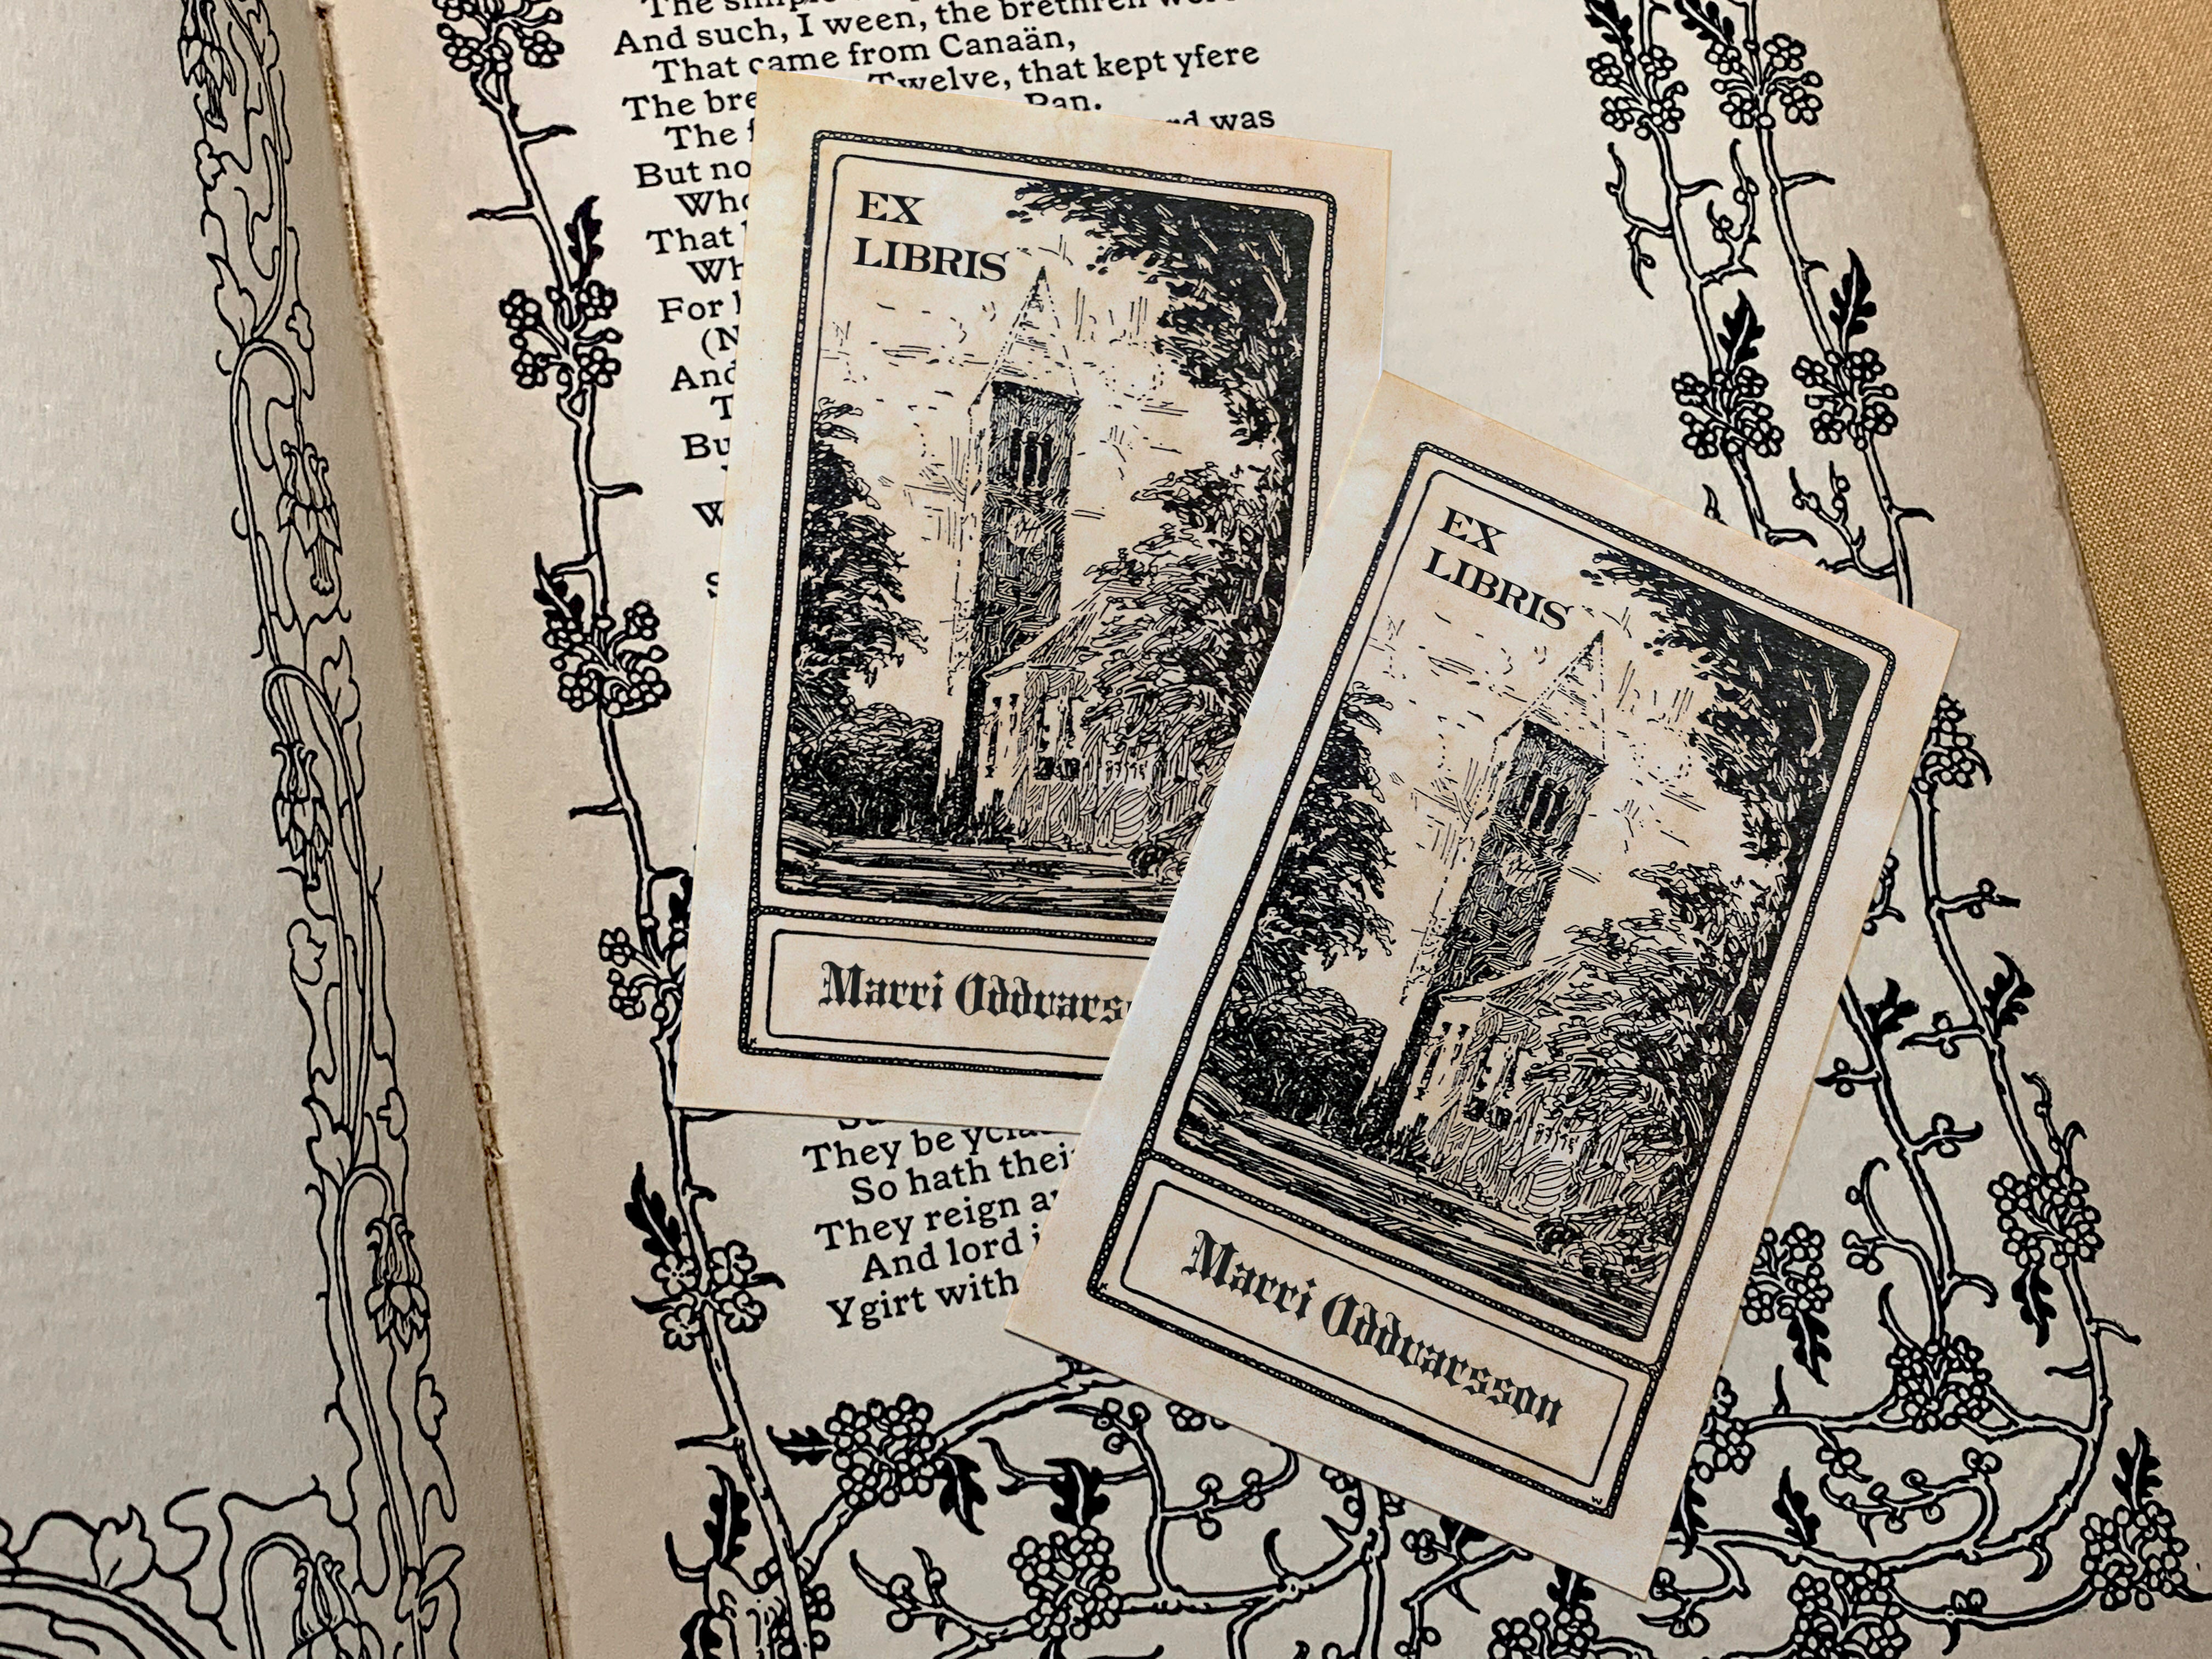 Country Churchyard, Personalized Ex-Libris Bookplates, Crafted on Traditional Gummed Paper, 2.5in x 4in, Set of 30